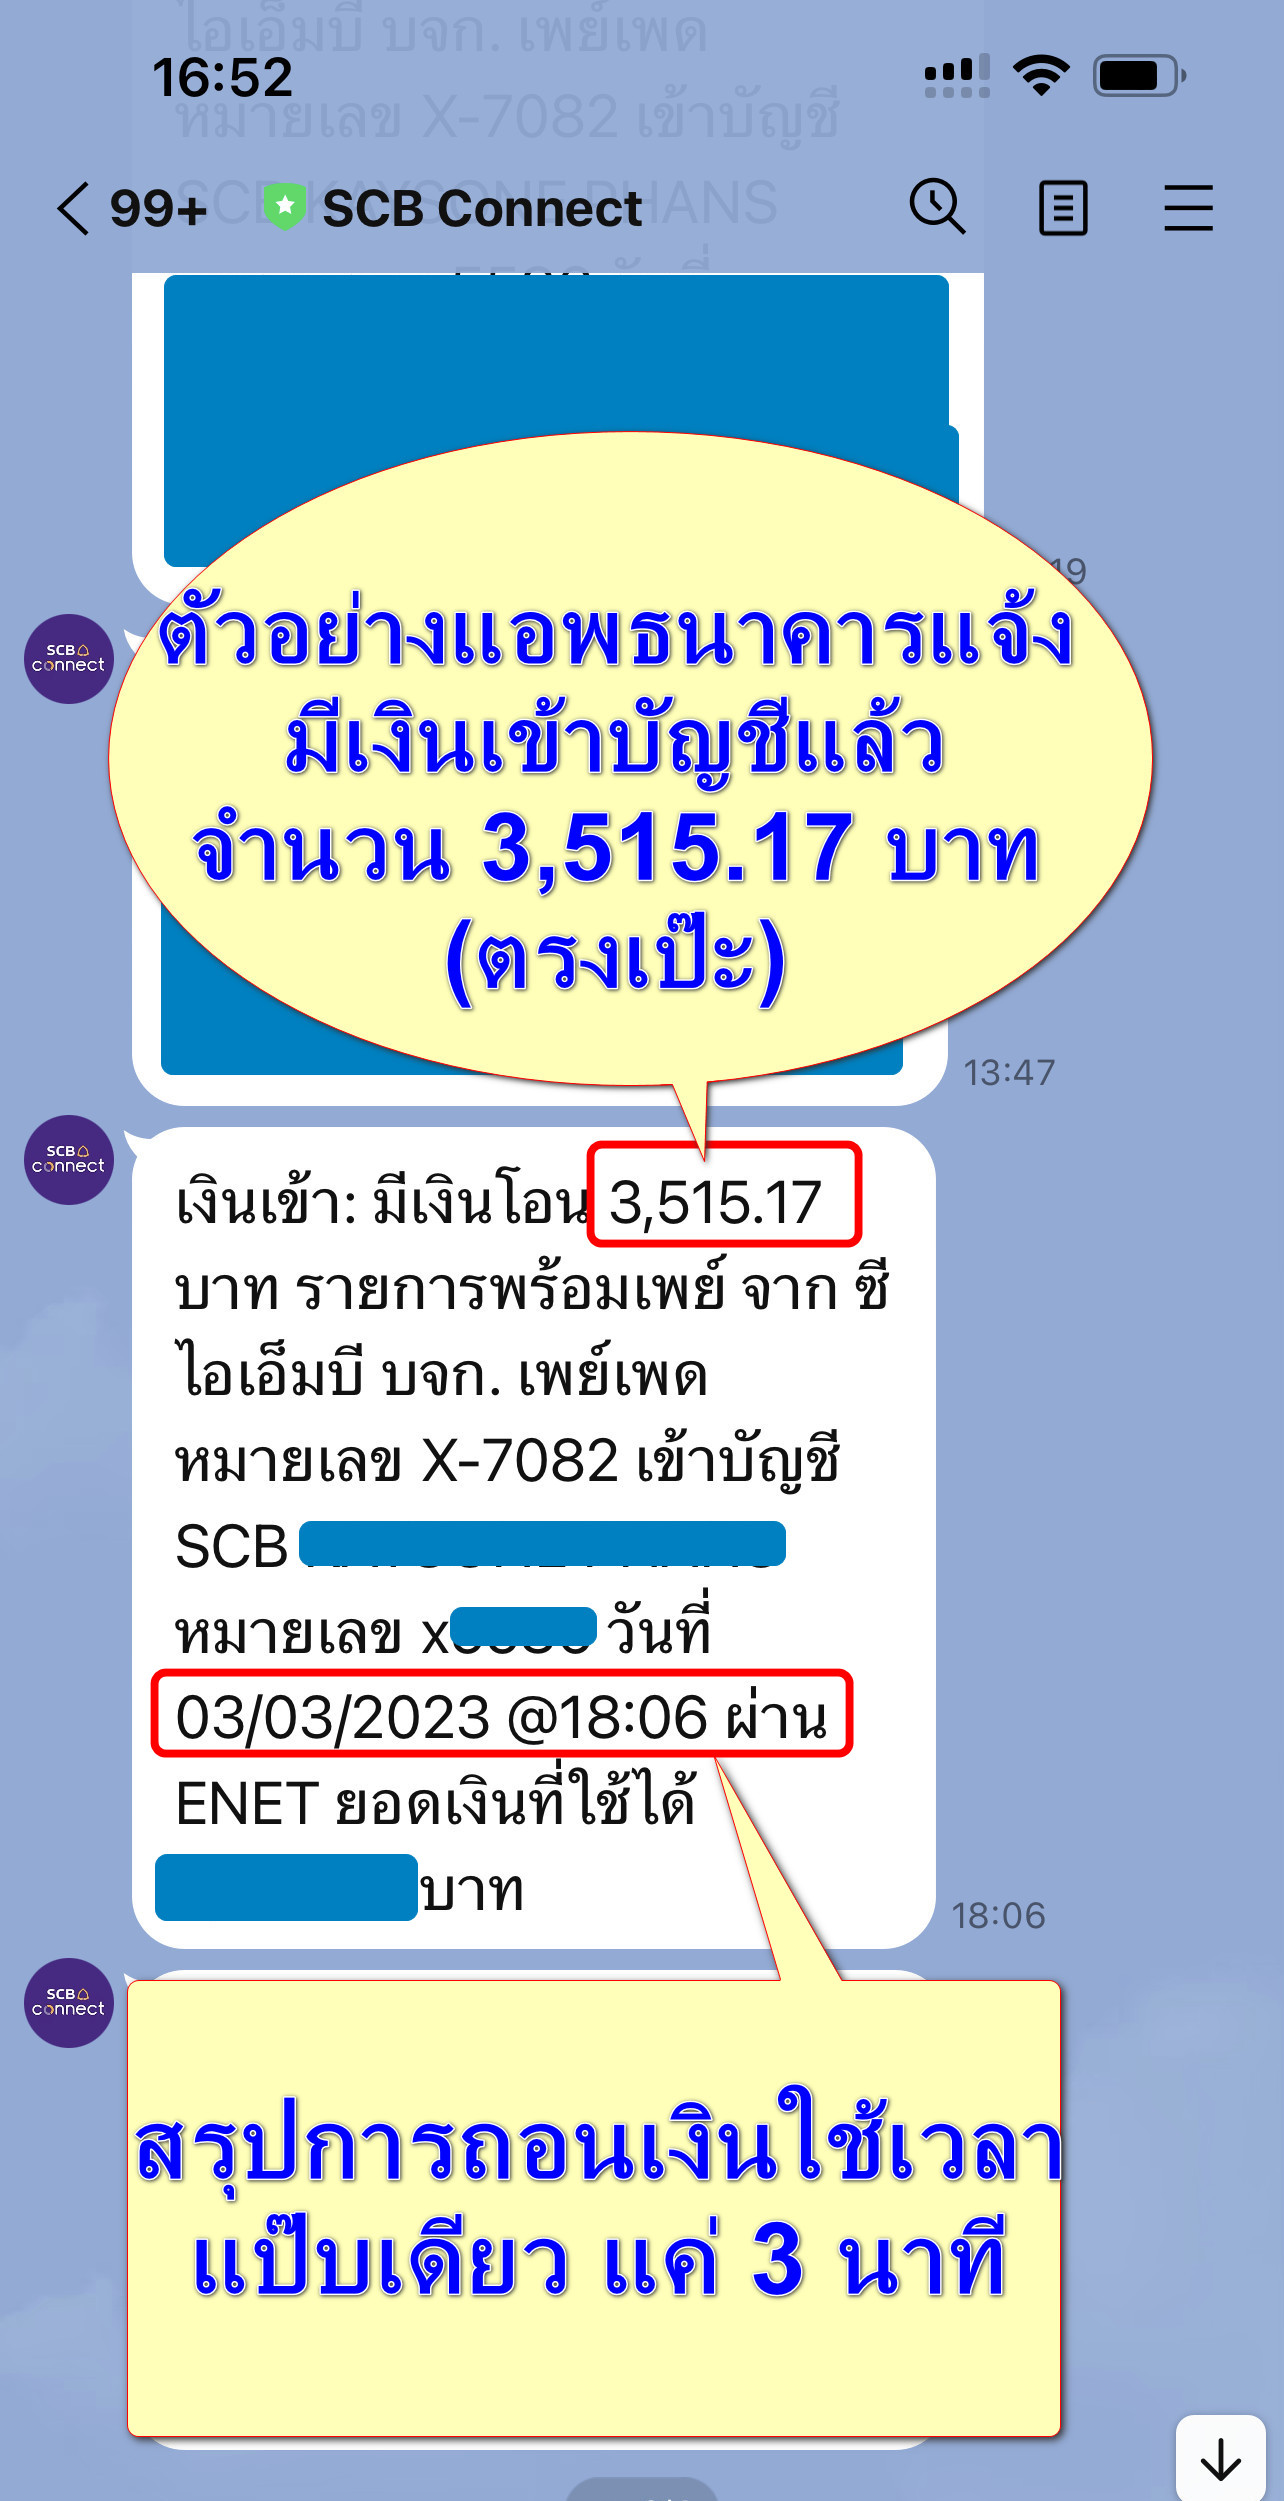 example of successfully withdrawing xm money to a thai bank ok 1